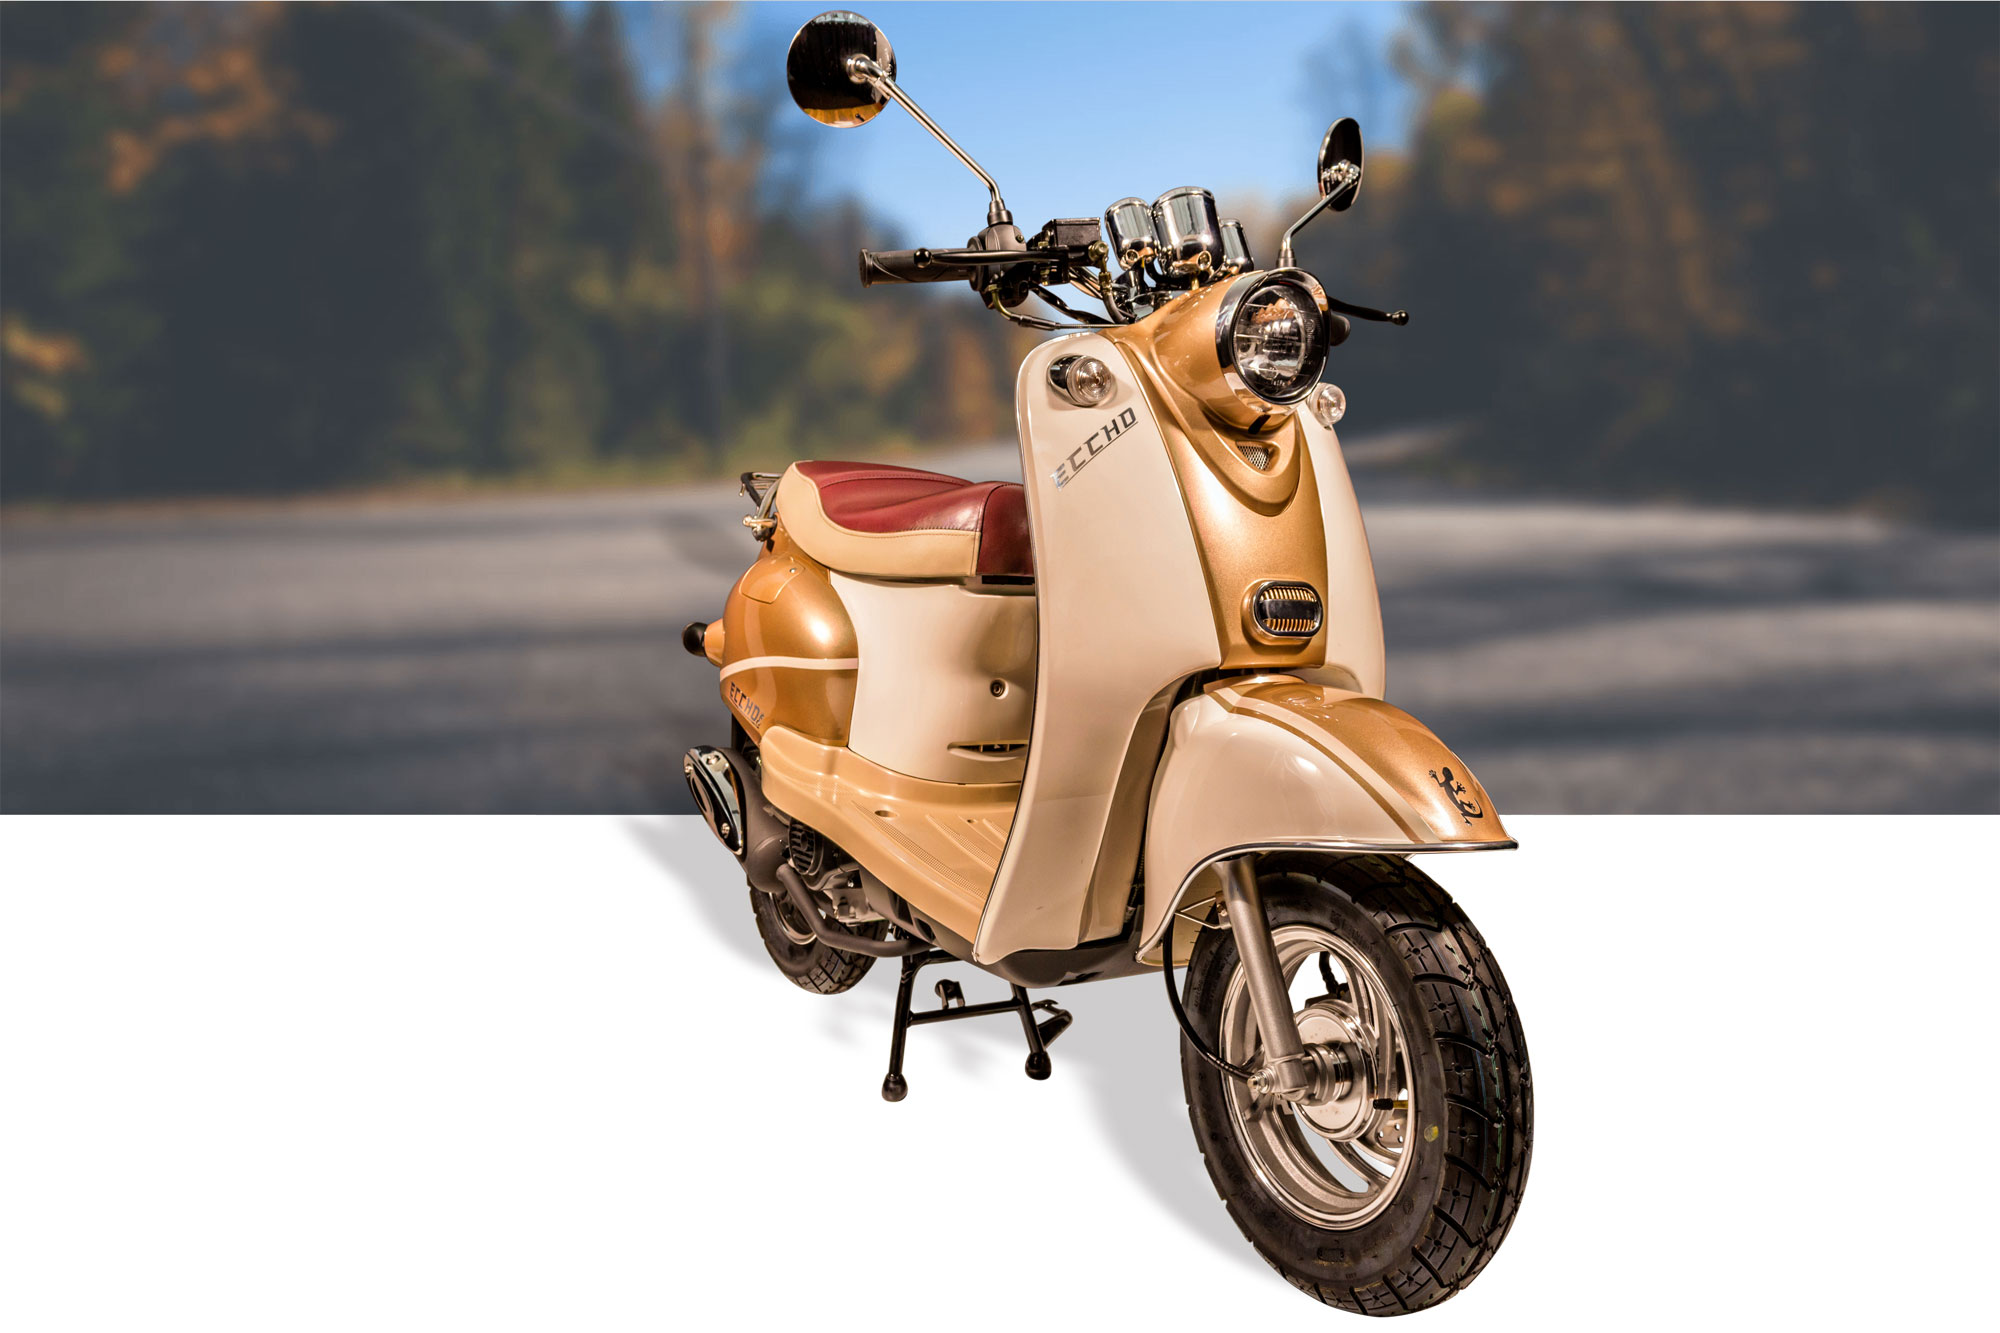 scooter-50-scooter-125-eccho-TY50QT-5D-GOLD